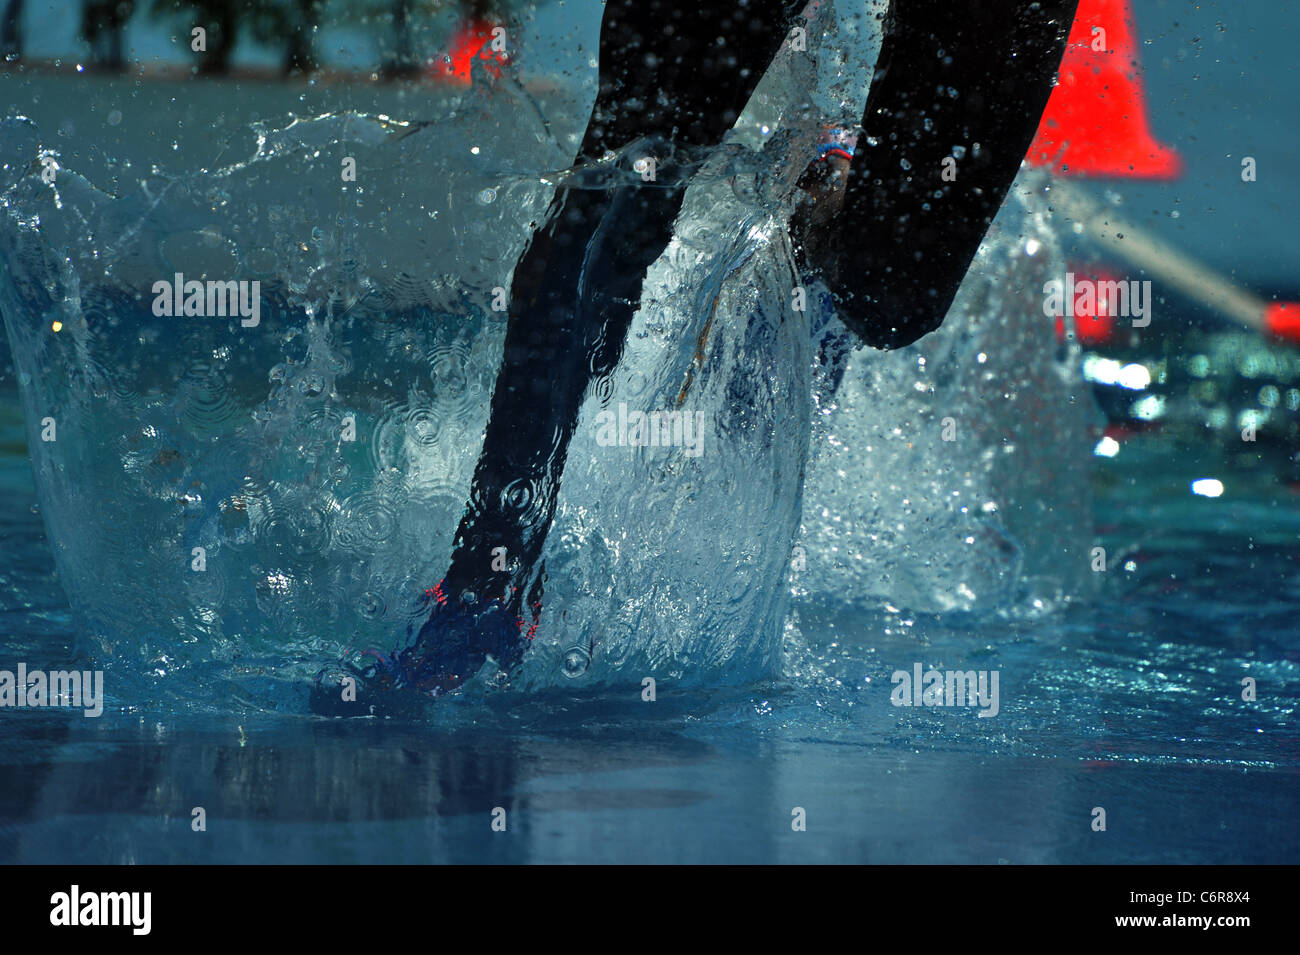 The ambiance shot of the 13th IAAF World Championships in Athletics. Stock Photo